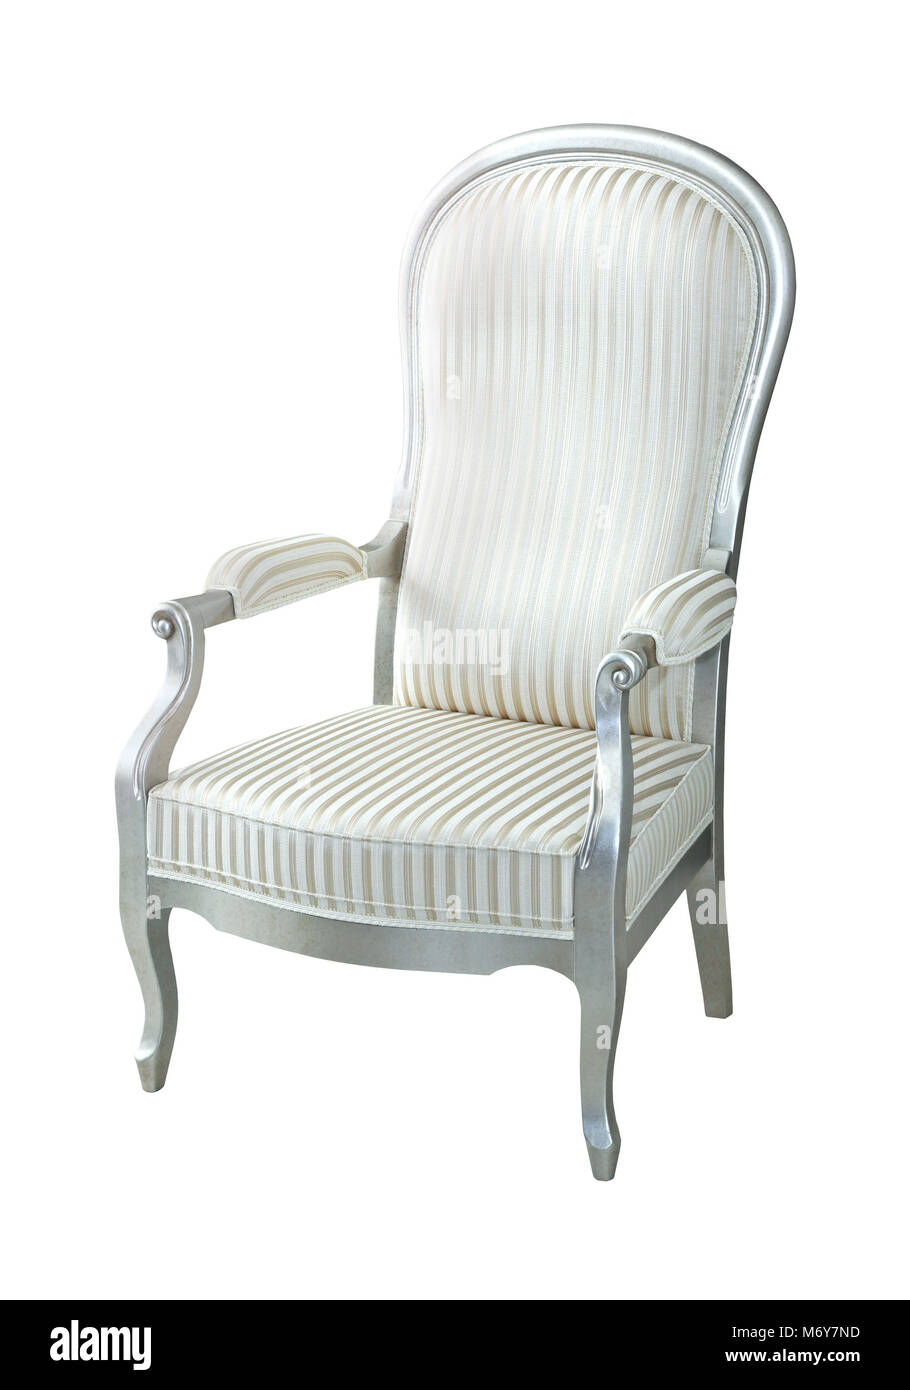 Vintage silver chair isolated with clipping path included Stock Photo